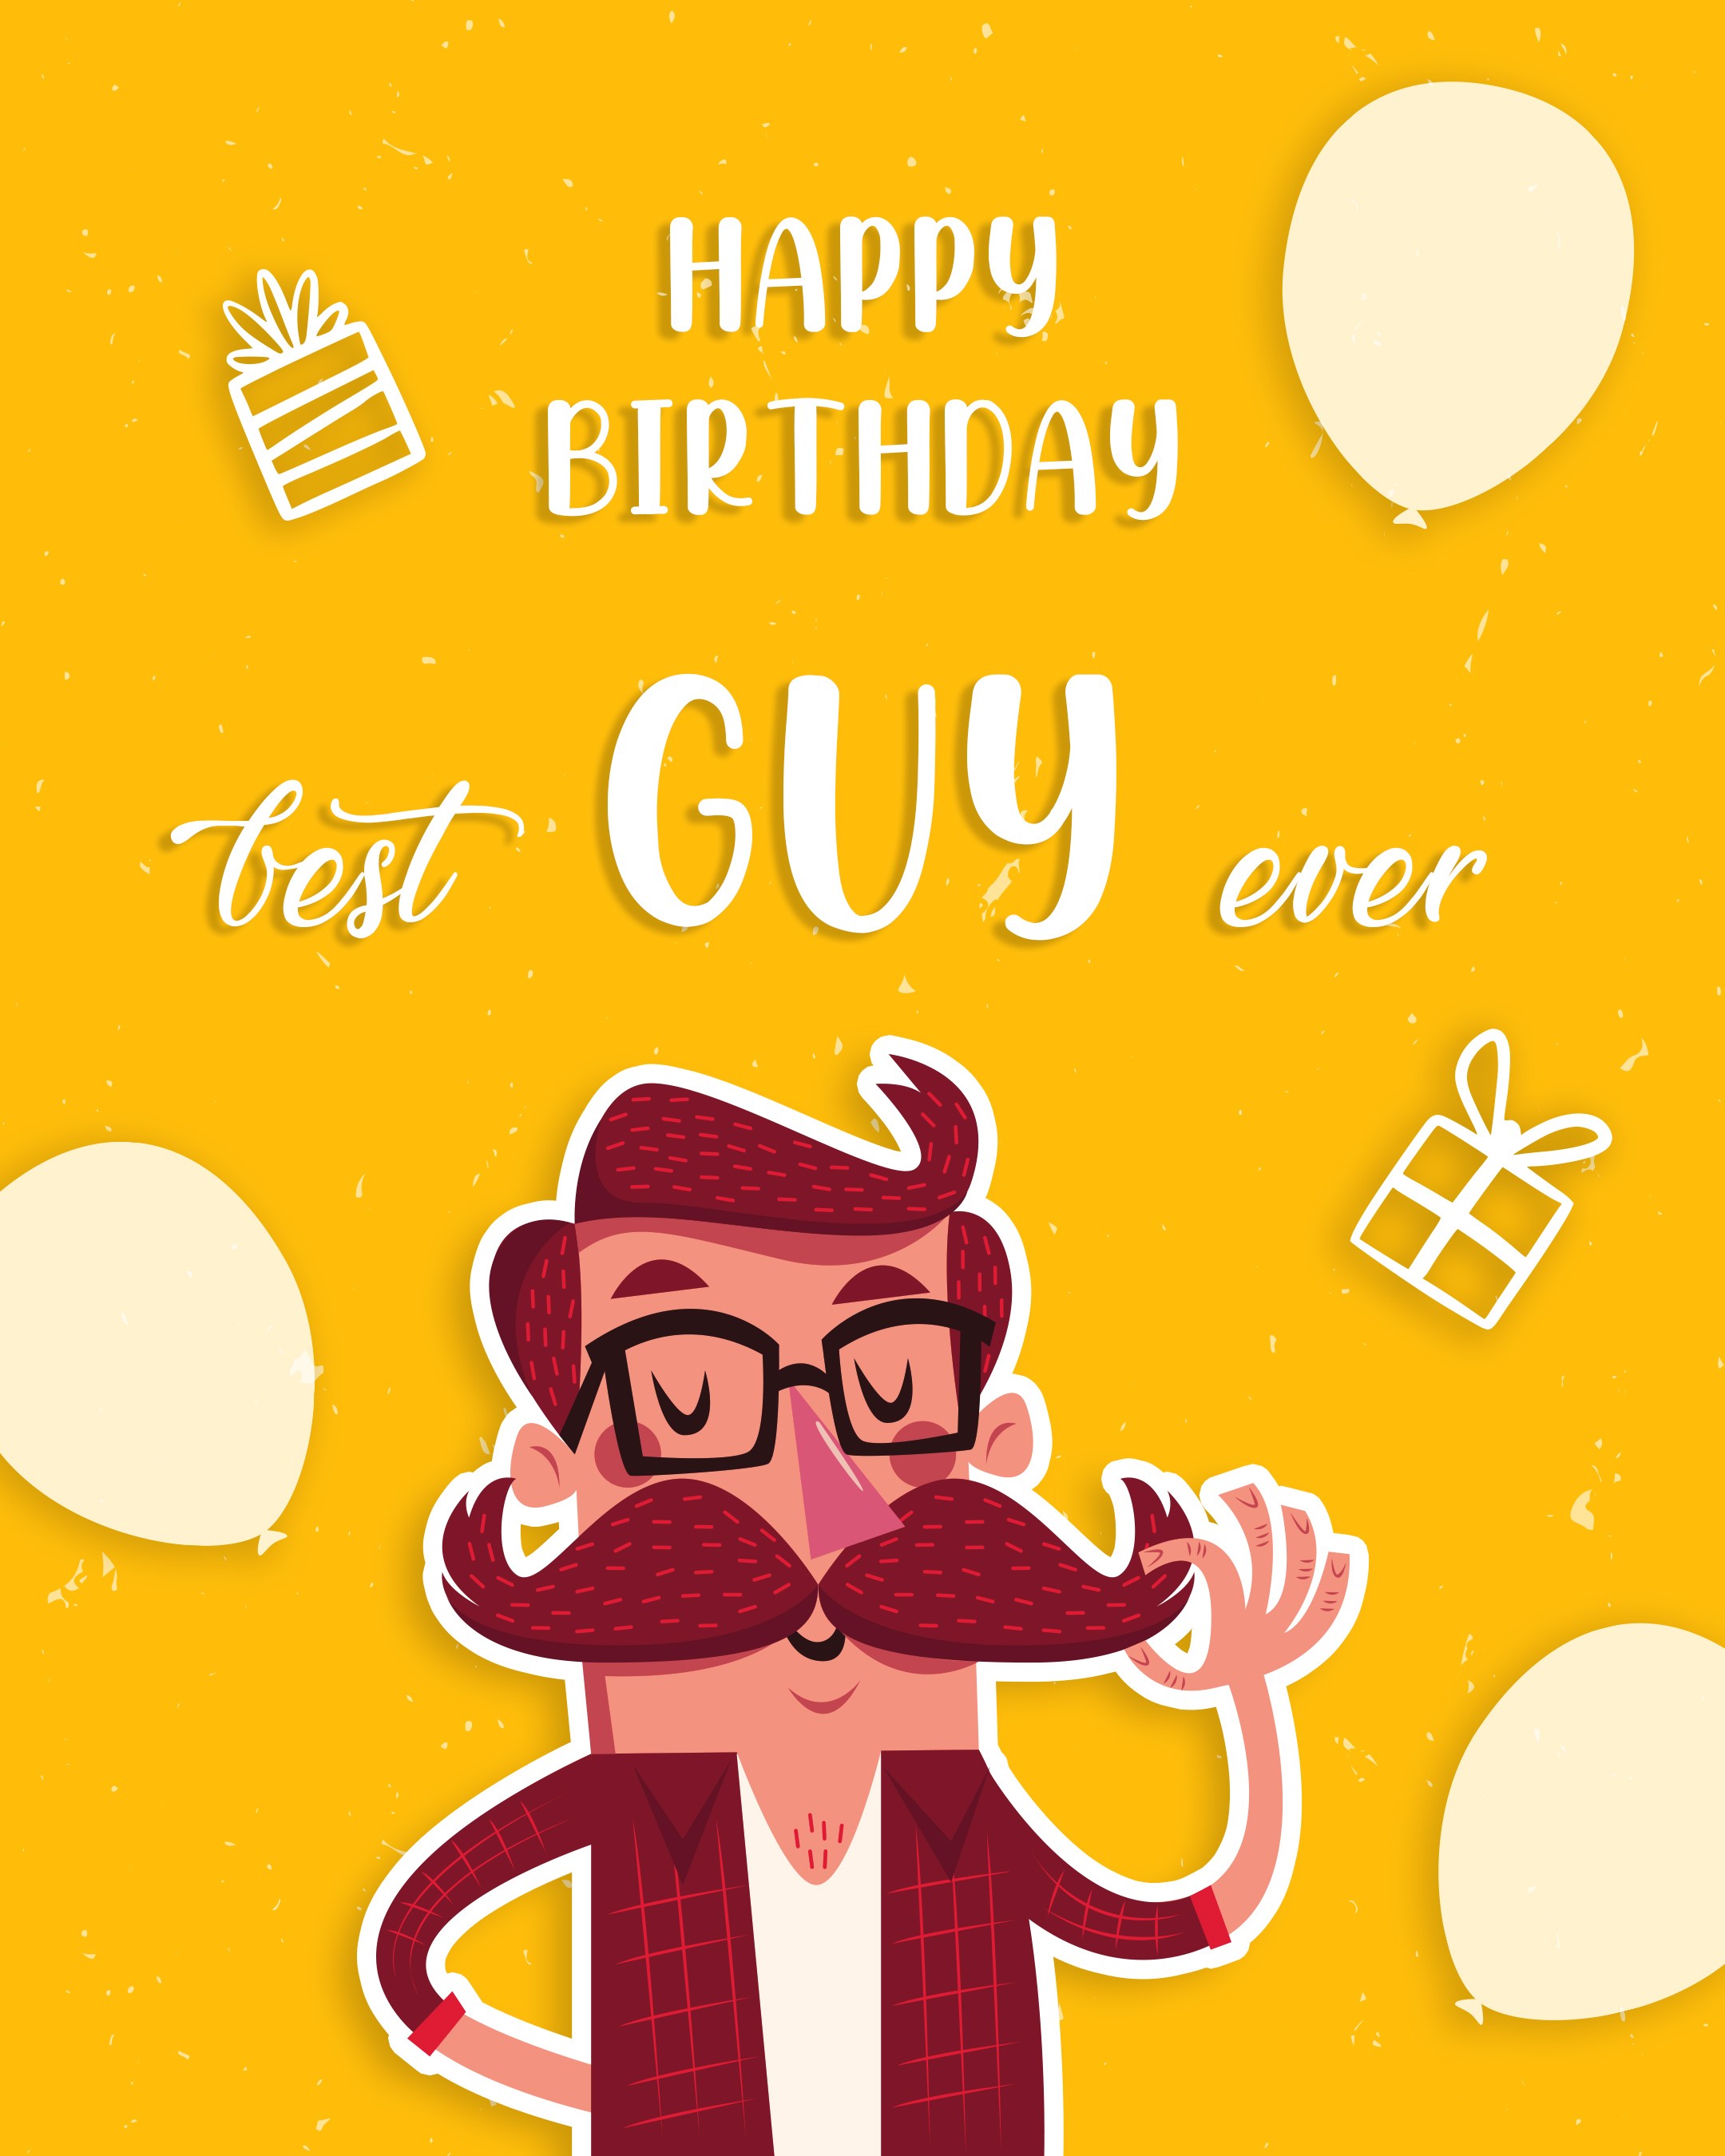 Free Cute Happy Birthday Image For Guy With Yellow Background - birthdayimg.com